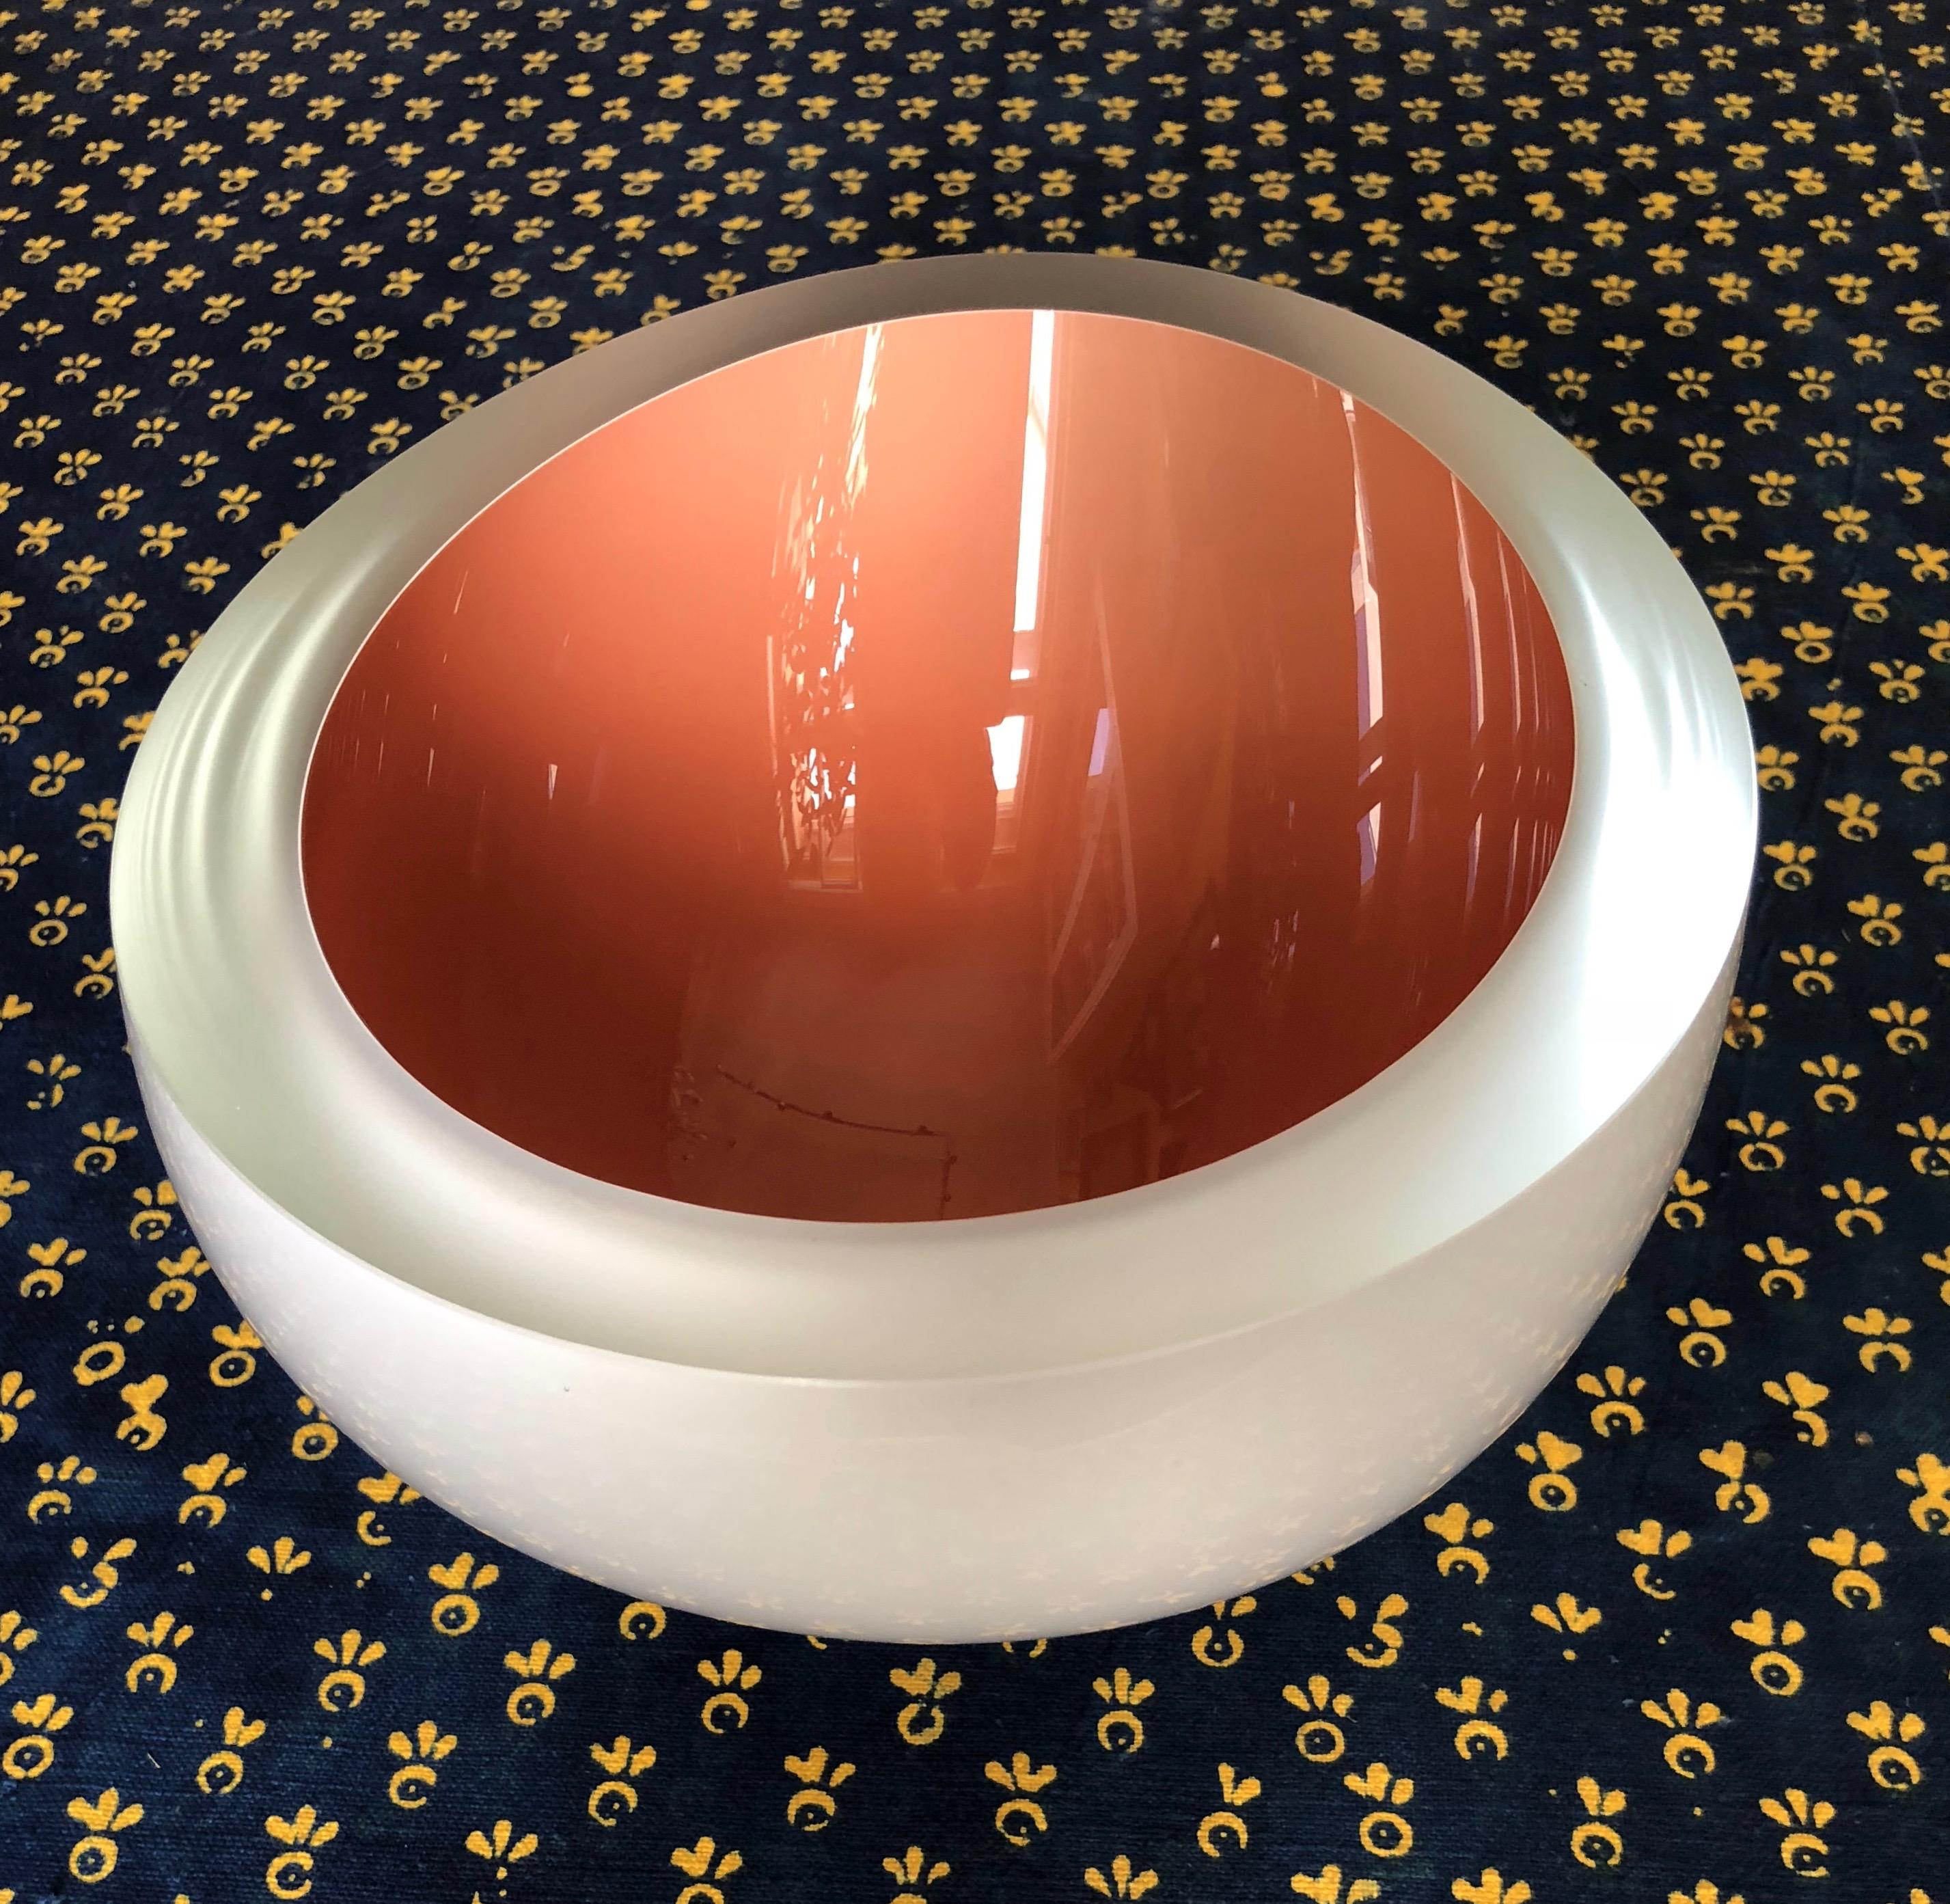 Contemporary Studio Glass Bowl in Coral Color, Made in the Czech Republic, 2010 For Sale 6